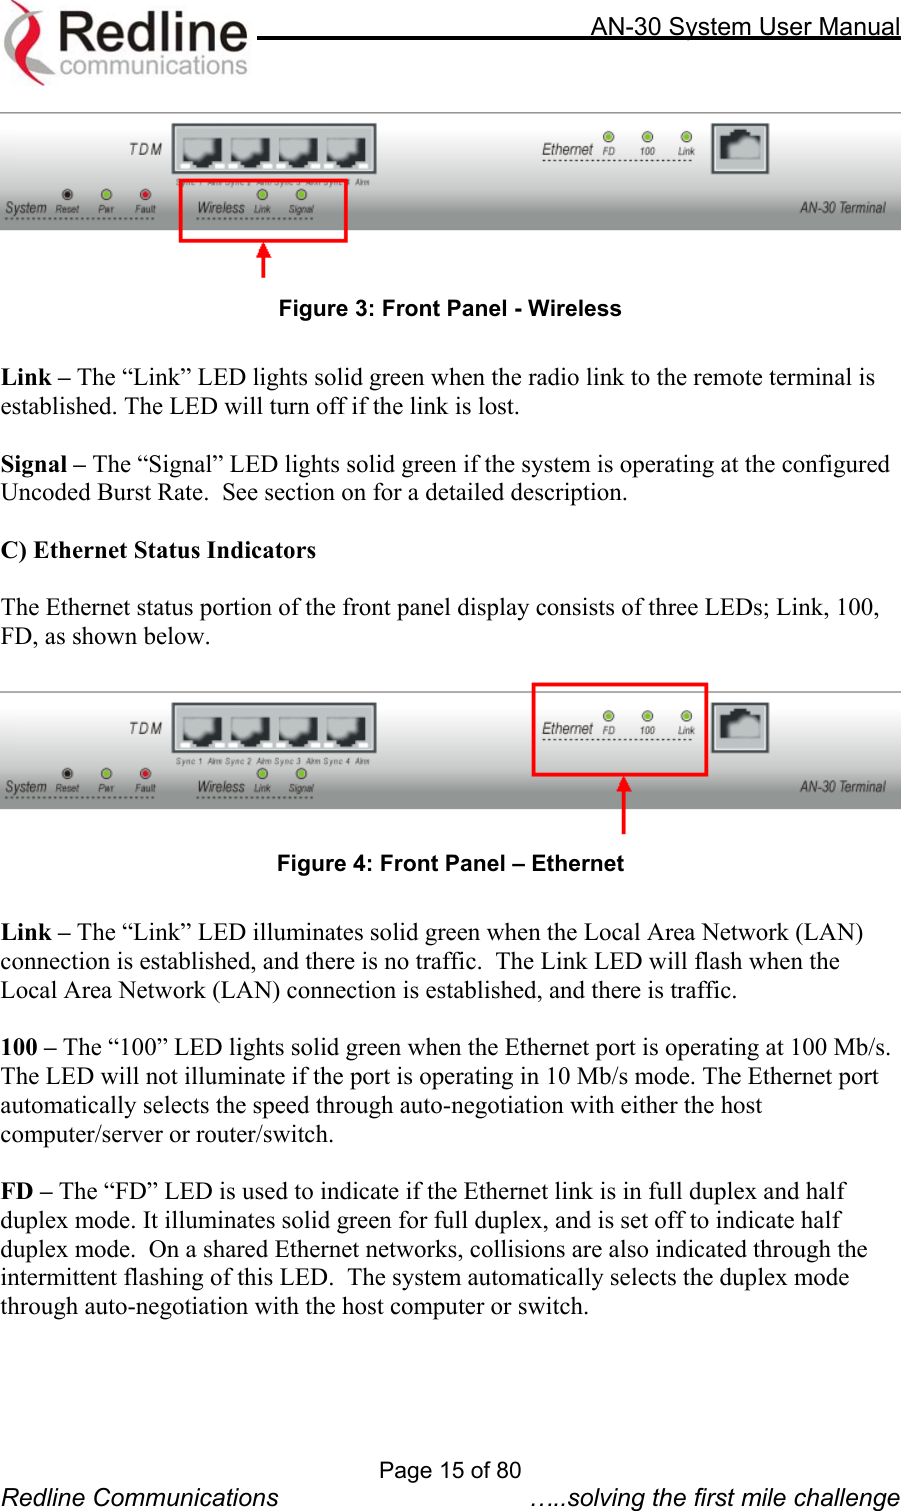     AN-30 System User Manual   Figure 3: Front Panel - Wireless  Link – The “Link” LED lights solid green when the radio link to the remote terminal is established. The LED will turn off if the link is lost.   Signal – The “Signal” LED lights solid green if the system is operating at the configured Uncoded Burst Rate.  See section on for a detailed description.  C) Ethernet Status Indicators  The Ethernet status portion of the front panel display consists of three LEDs; Link, 100, FD, as shown below.   Figure 4: Front Panel – Ethernet  Link – The “Link” LED illuminates solid green when the Local Area Network (LAN) connection is established, and there is no traffic.  The Link LED will flash when the Local Area Network (LAN) connection is established, and there is traffic.  100 – The “100” LED lights solid green when the Ethernet port is operating at 100 Mb/s.  The LED will not illuminate if the port is operating in 10 Mb/s mode. The Ethernet port automatically selects the speed through auto-negotiation with either the host computer/server or router/switch.  FD – The “FD” LED is used to indicate if the Ethernet link is in full duplex and half duplex mode. It illuminates solid green for full duplex, and is set off to indicate half duplex mode.  On a shared Ethernet networks, collisions are also indicated through the intermittent flashing of this LED.  The system automatically selects the duplex mode through auto-negotiation with the host computer or switch.       Page 15 of 80 Redline Communications  …..solving the first mile challenge 